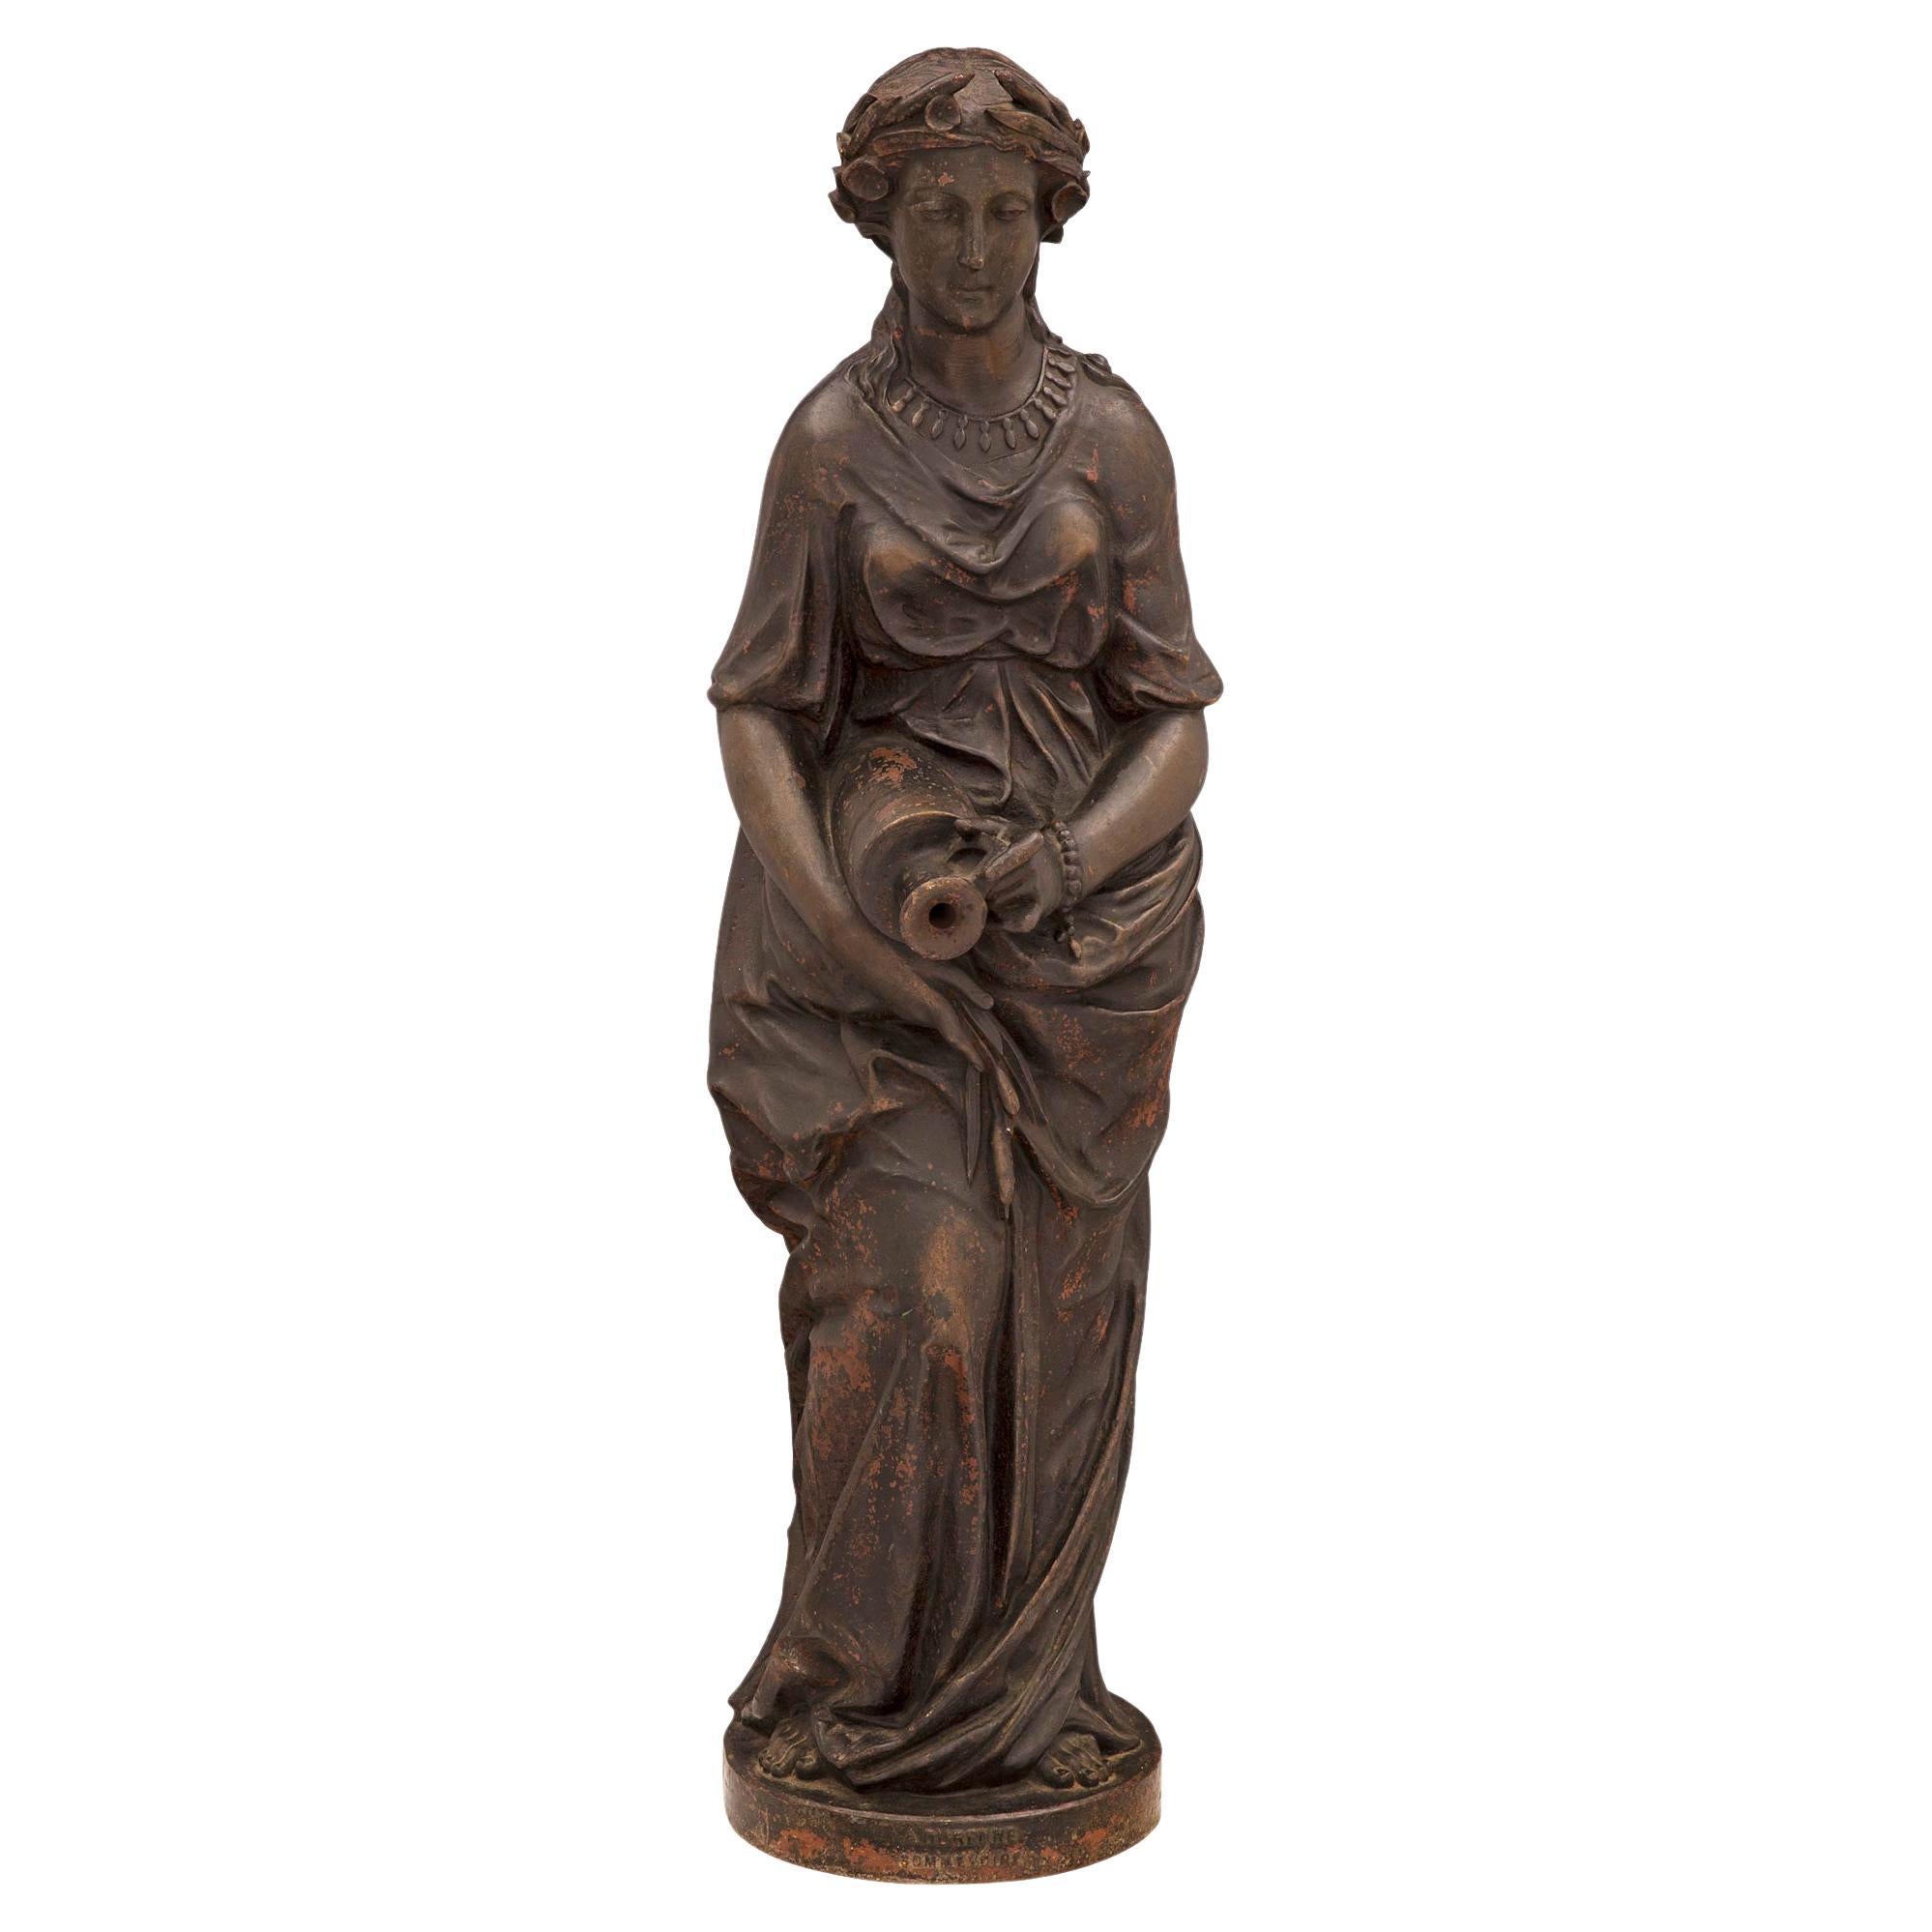 A superb French 19th century cast iron fountain of a maiden, signed A. Durenne, Sommevoire. The fountain is raised by a circular base where the signature is displayed. Above is a beautiful maiden draped in a wonderfully executed flowing period